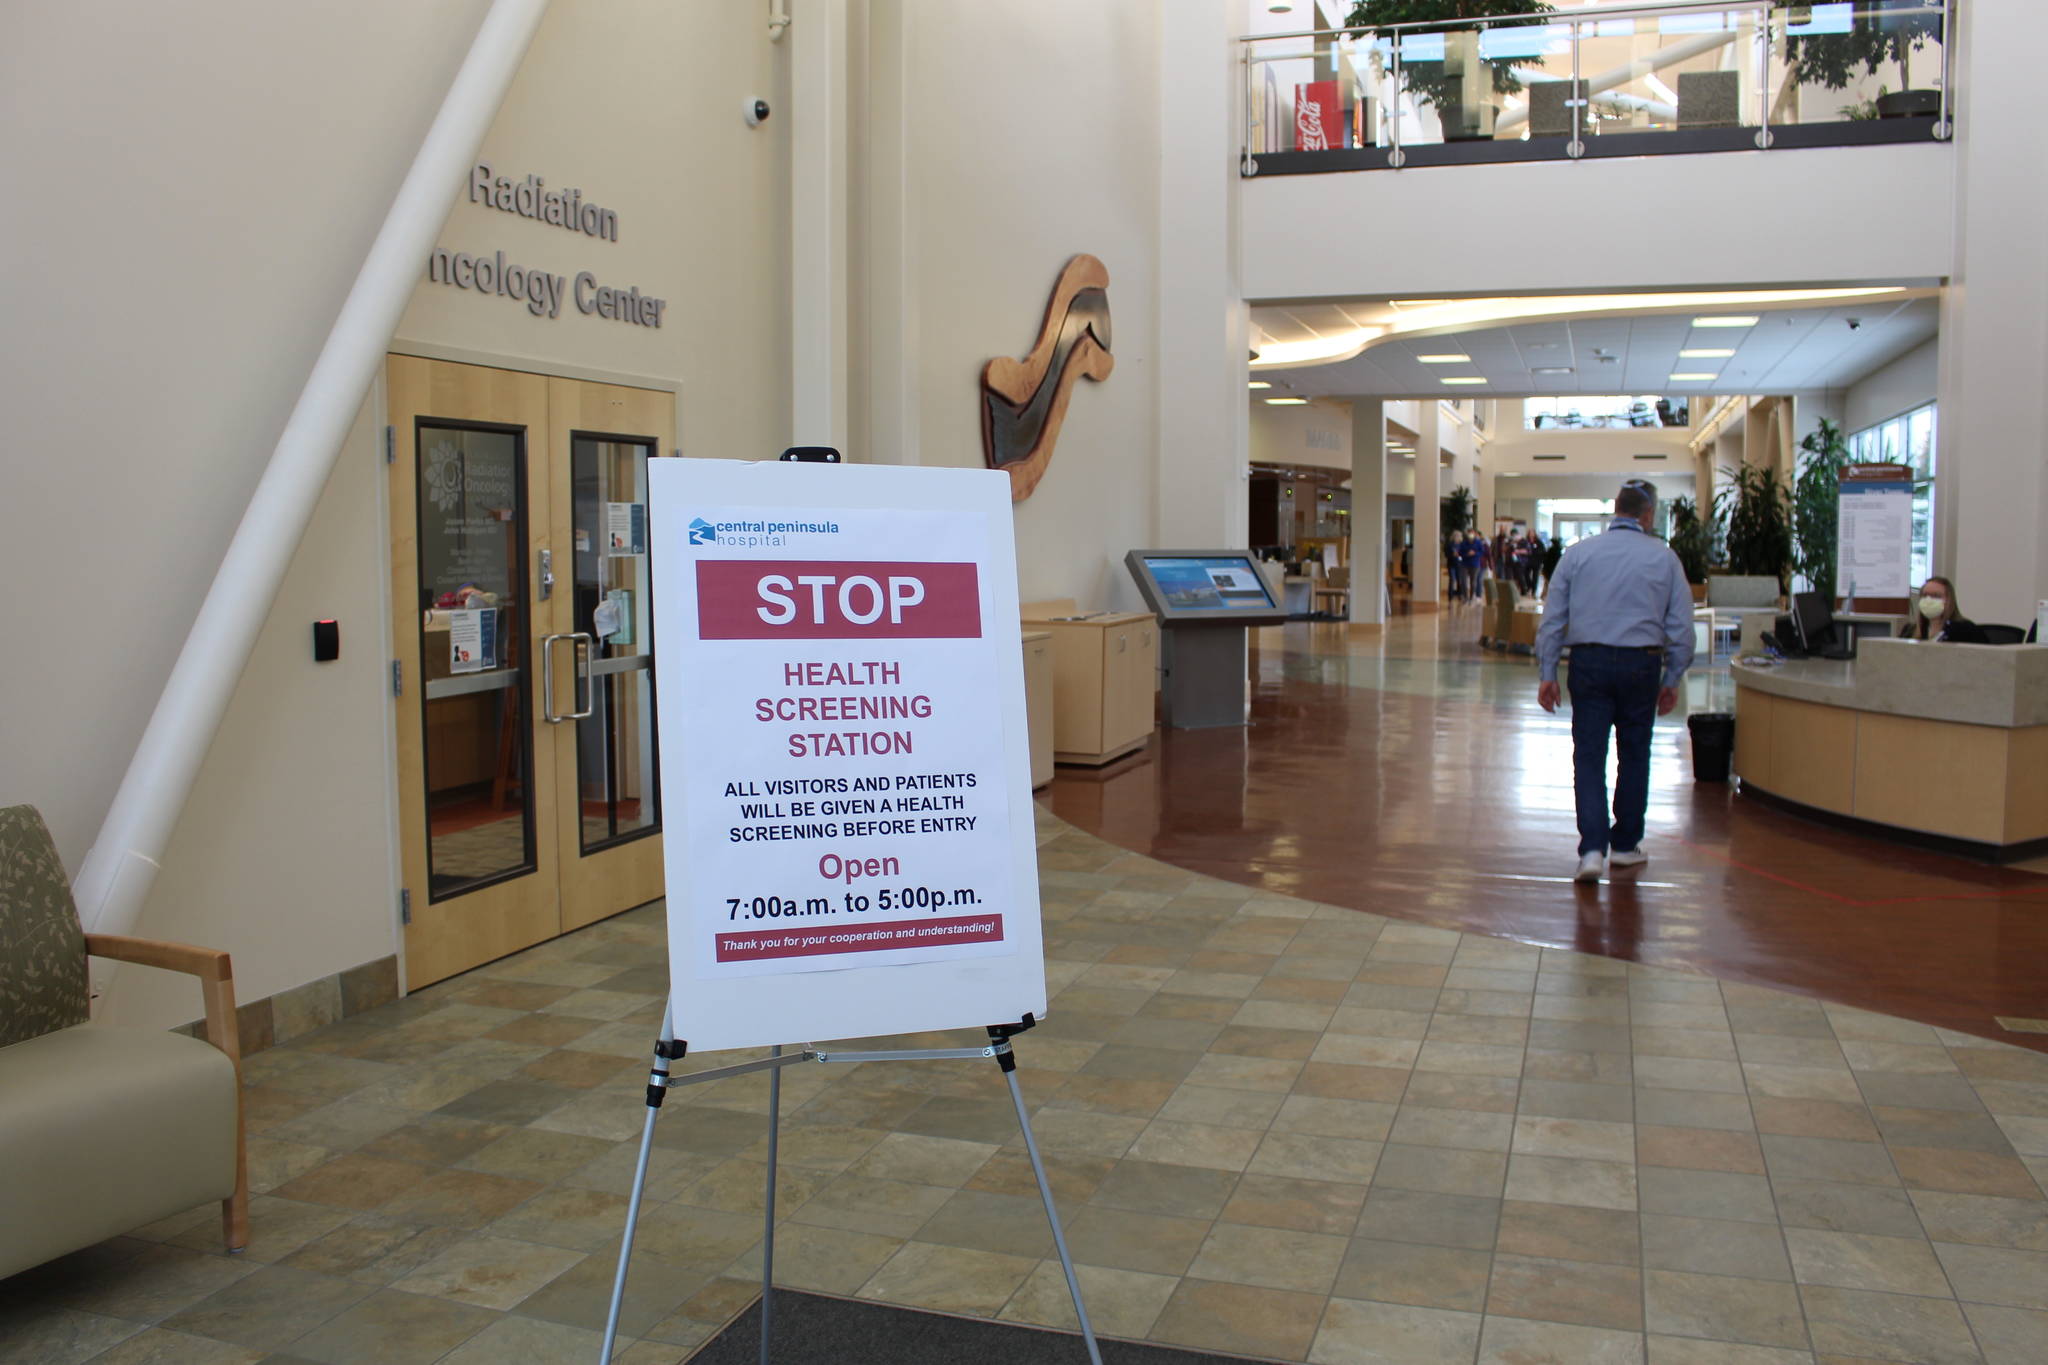 A sign instructing patients and visitors on the current screening process is seen here in the River Tower of Central Peninsula Hospital in Soldotna, Alaska on April 7, 2020. (Photo by Brian Mazurek/Peninsula Clarion)